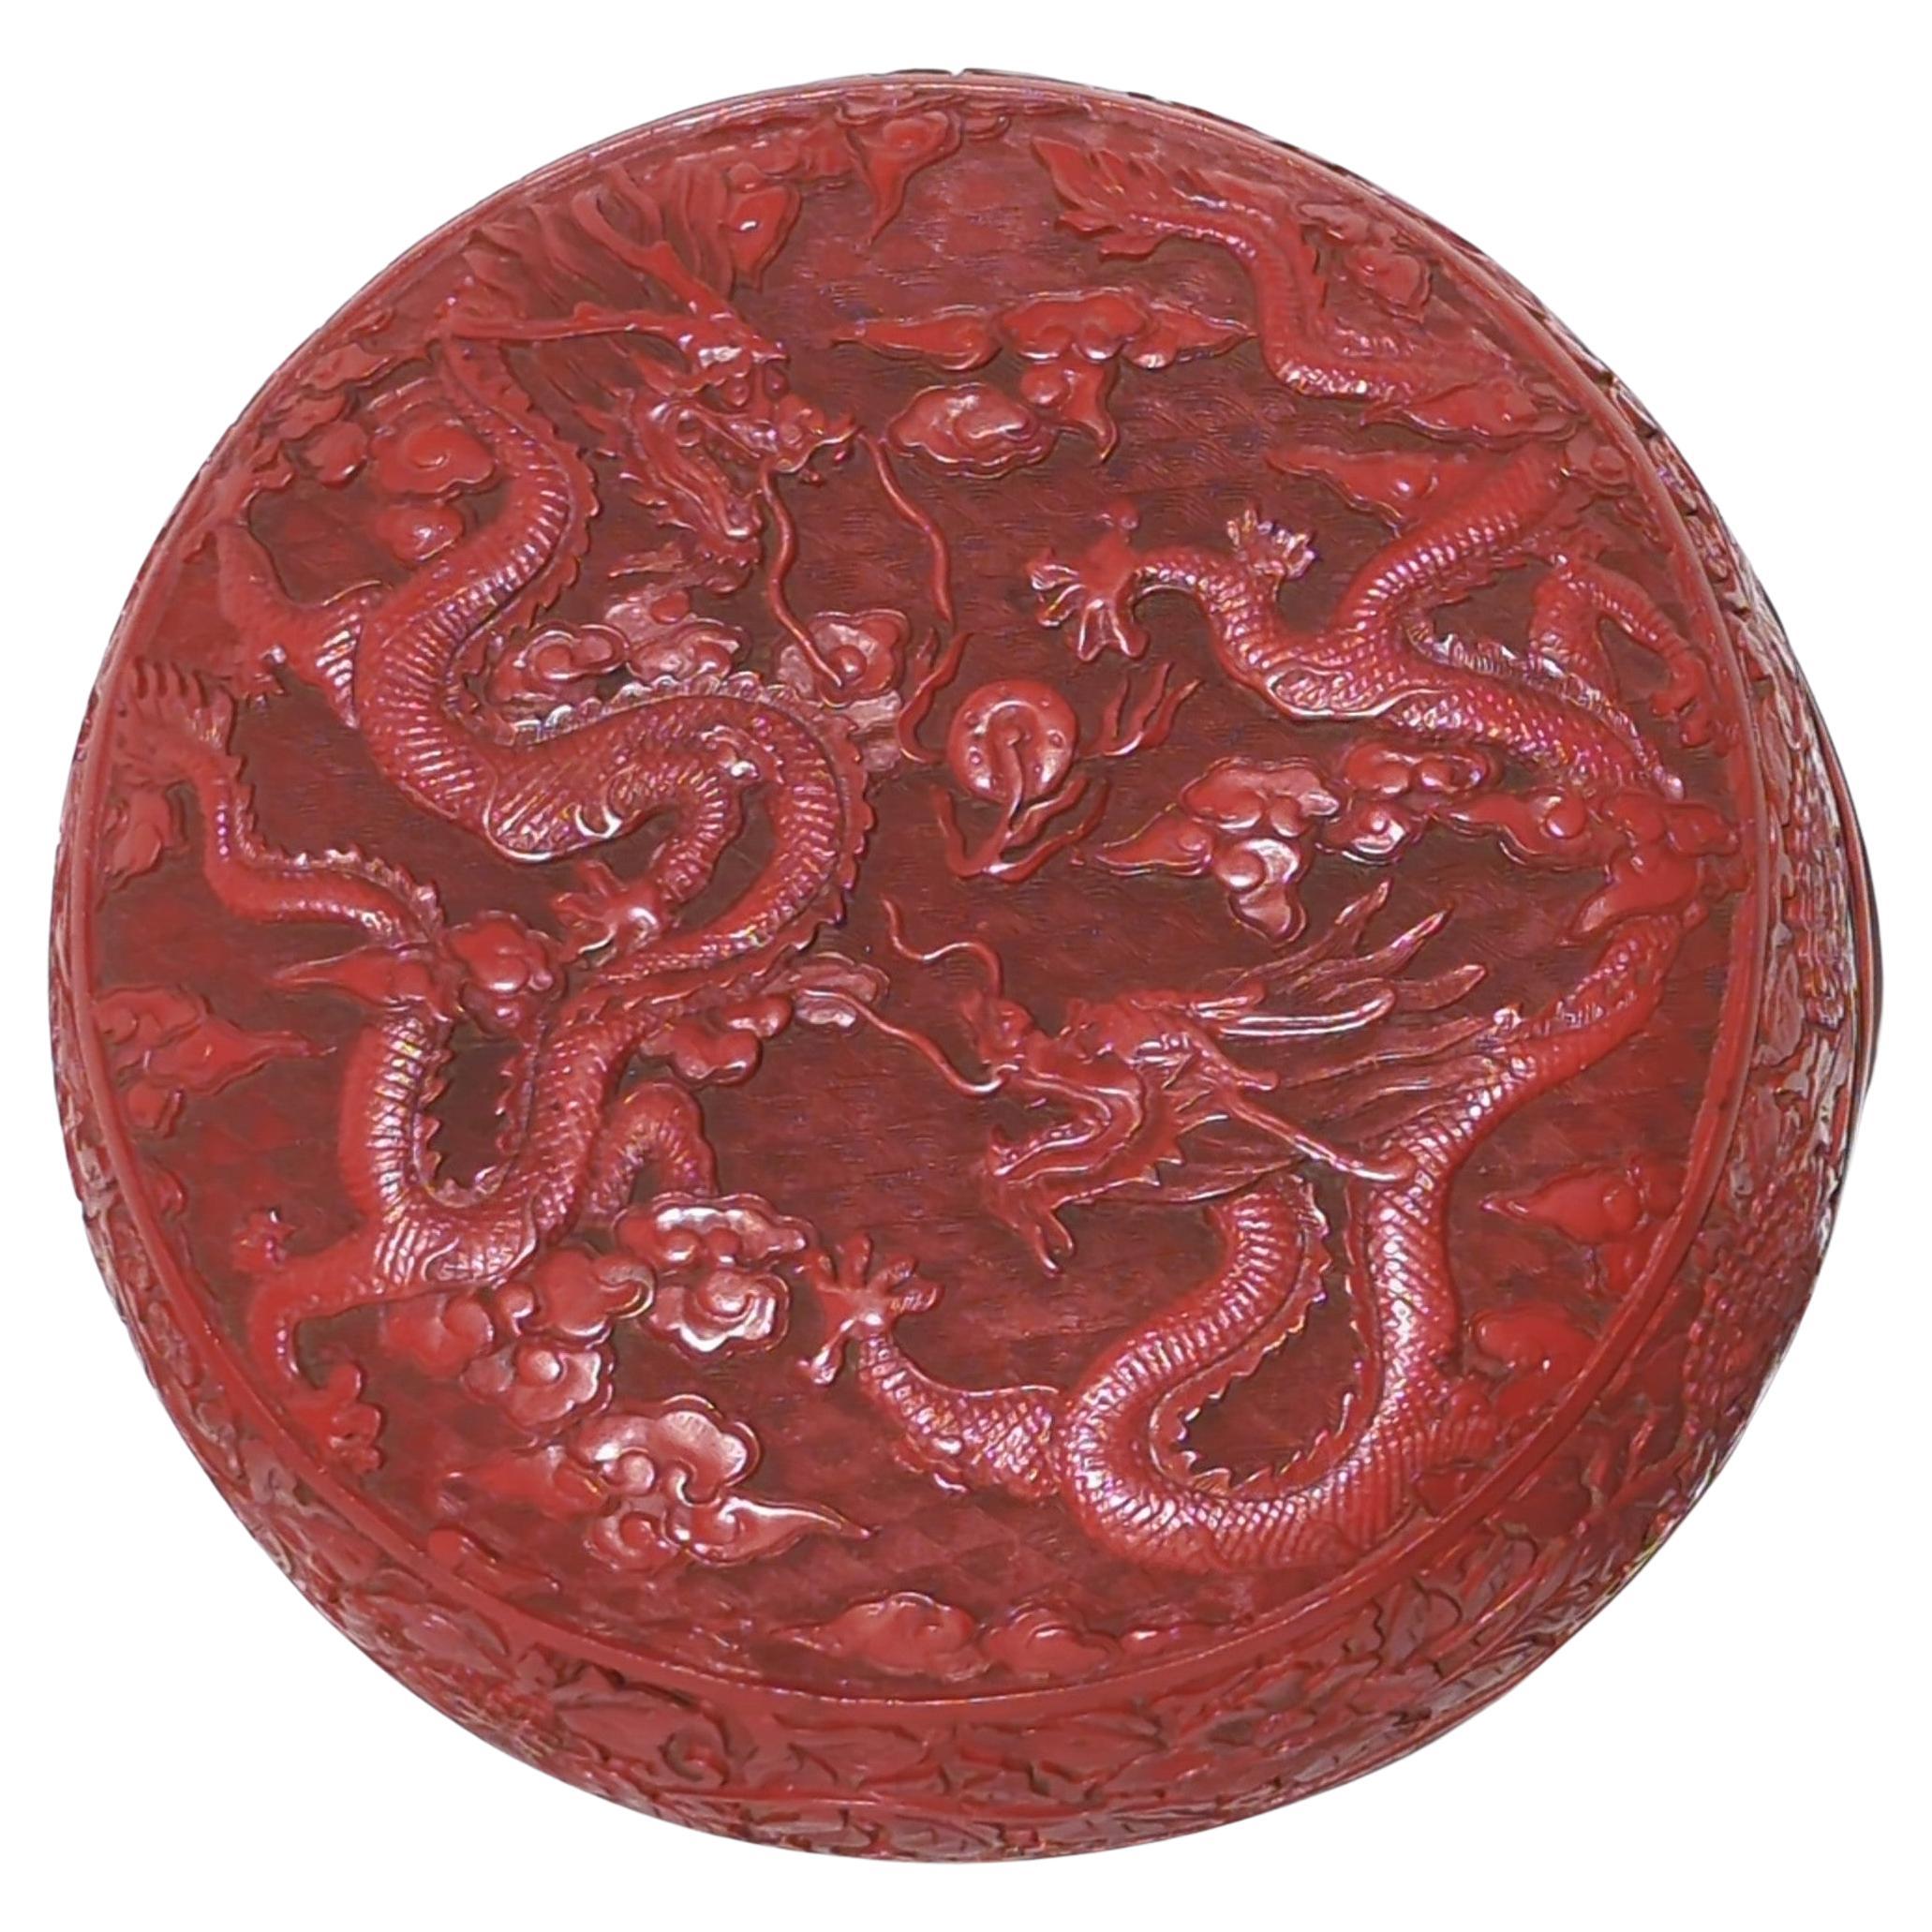 Large antique Chinese carved and painted cinnabar lacquer style covered round box, top decorated in relief with two fierce, scaly, slithering dragons chasing a flaming pearl amongst finely carved waves, with carved blossom and scrolling foliage to